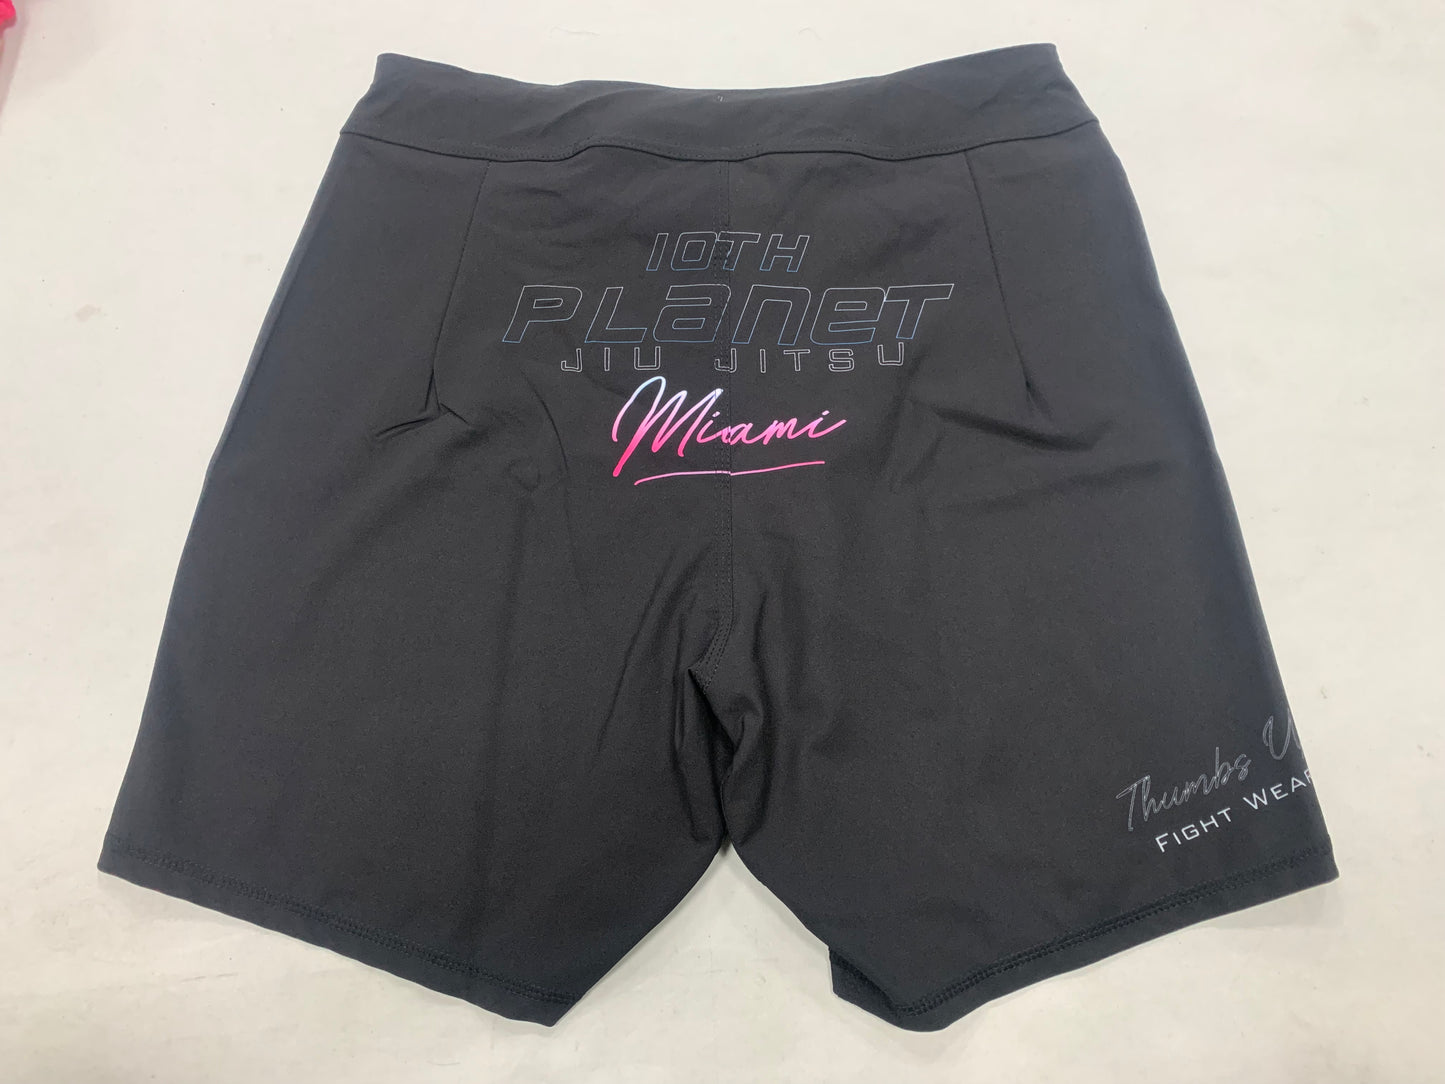 10th Planet Miami SHORTS - Grappling Shorts - Black with Miami Pink/Blue Colors #Trainordont